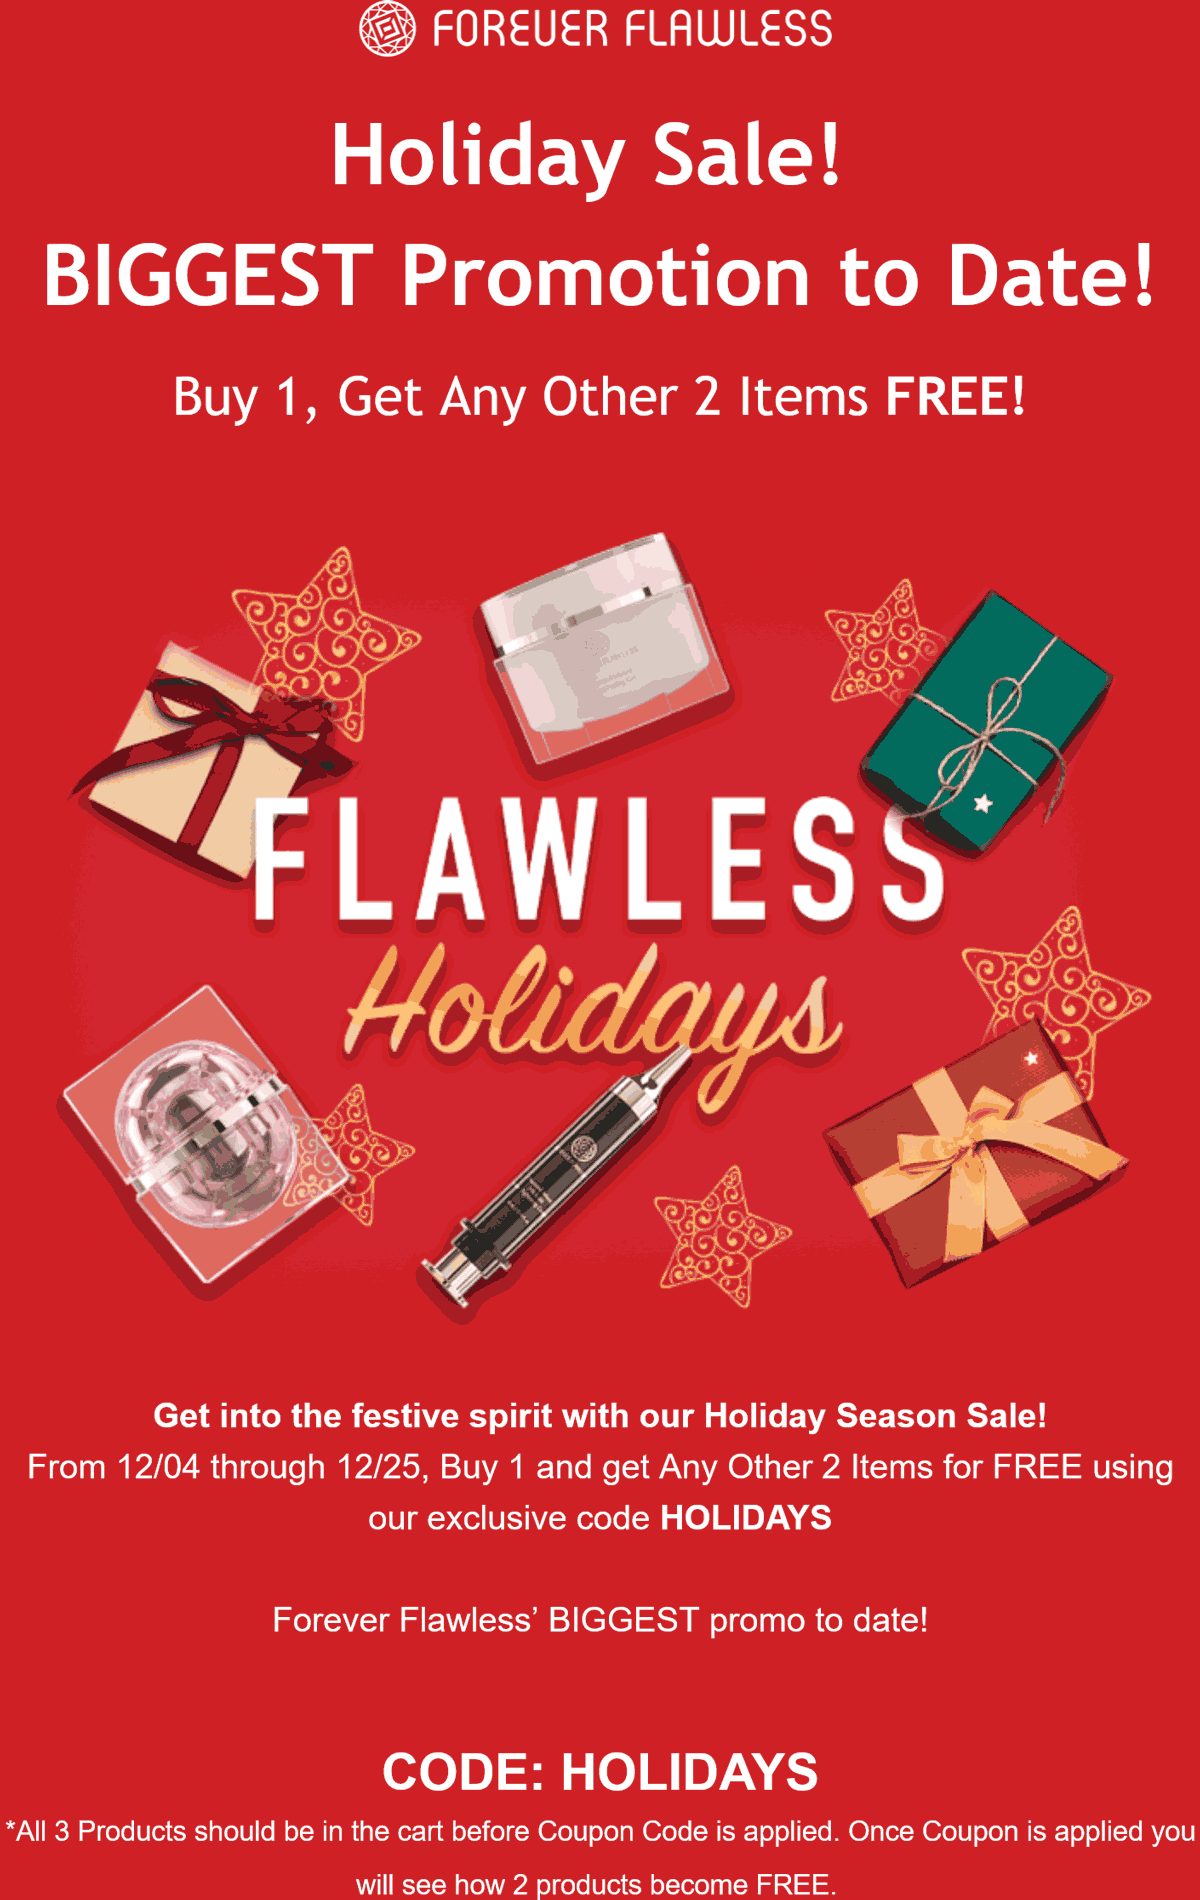 Forever Flawless stores Coupon  3-for-1 at Forever Flawless via promo code HOLIDAYS #foreverflawless 